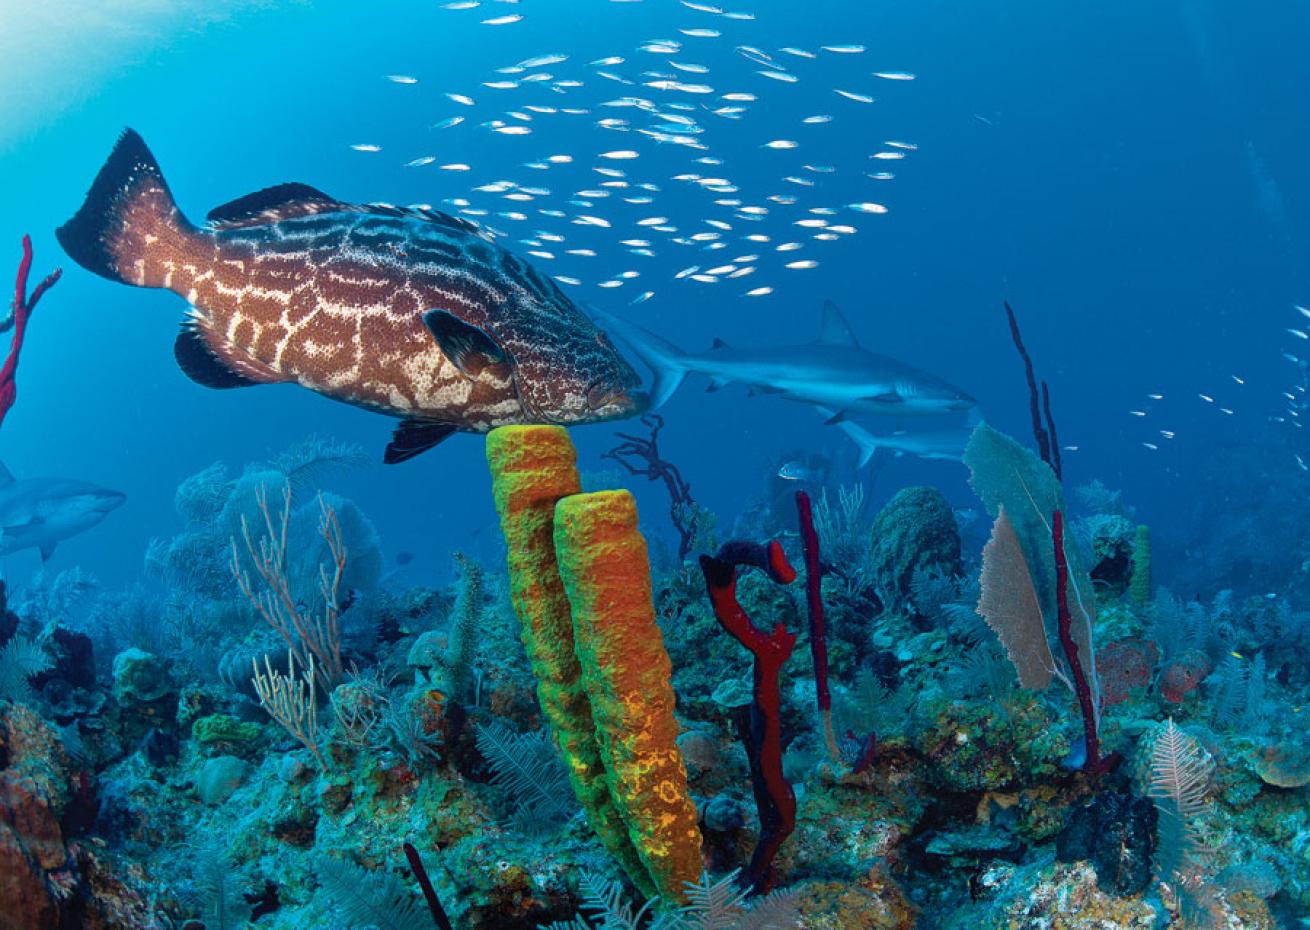 A typical underwater scene with sharks and grouper at Cuba's Gardens of the Queen